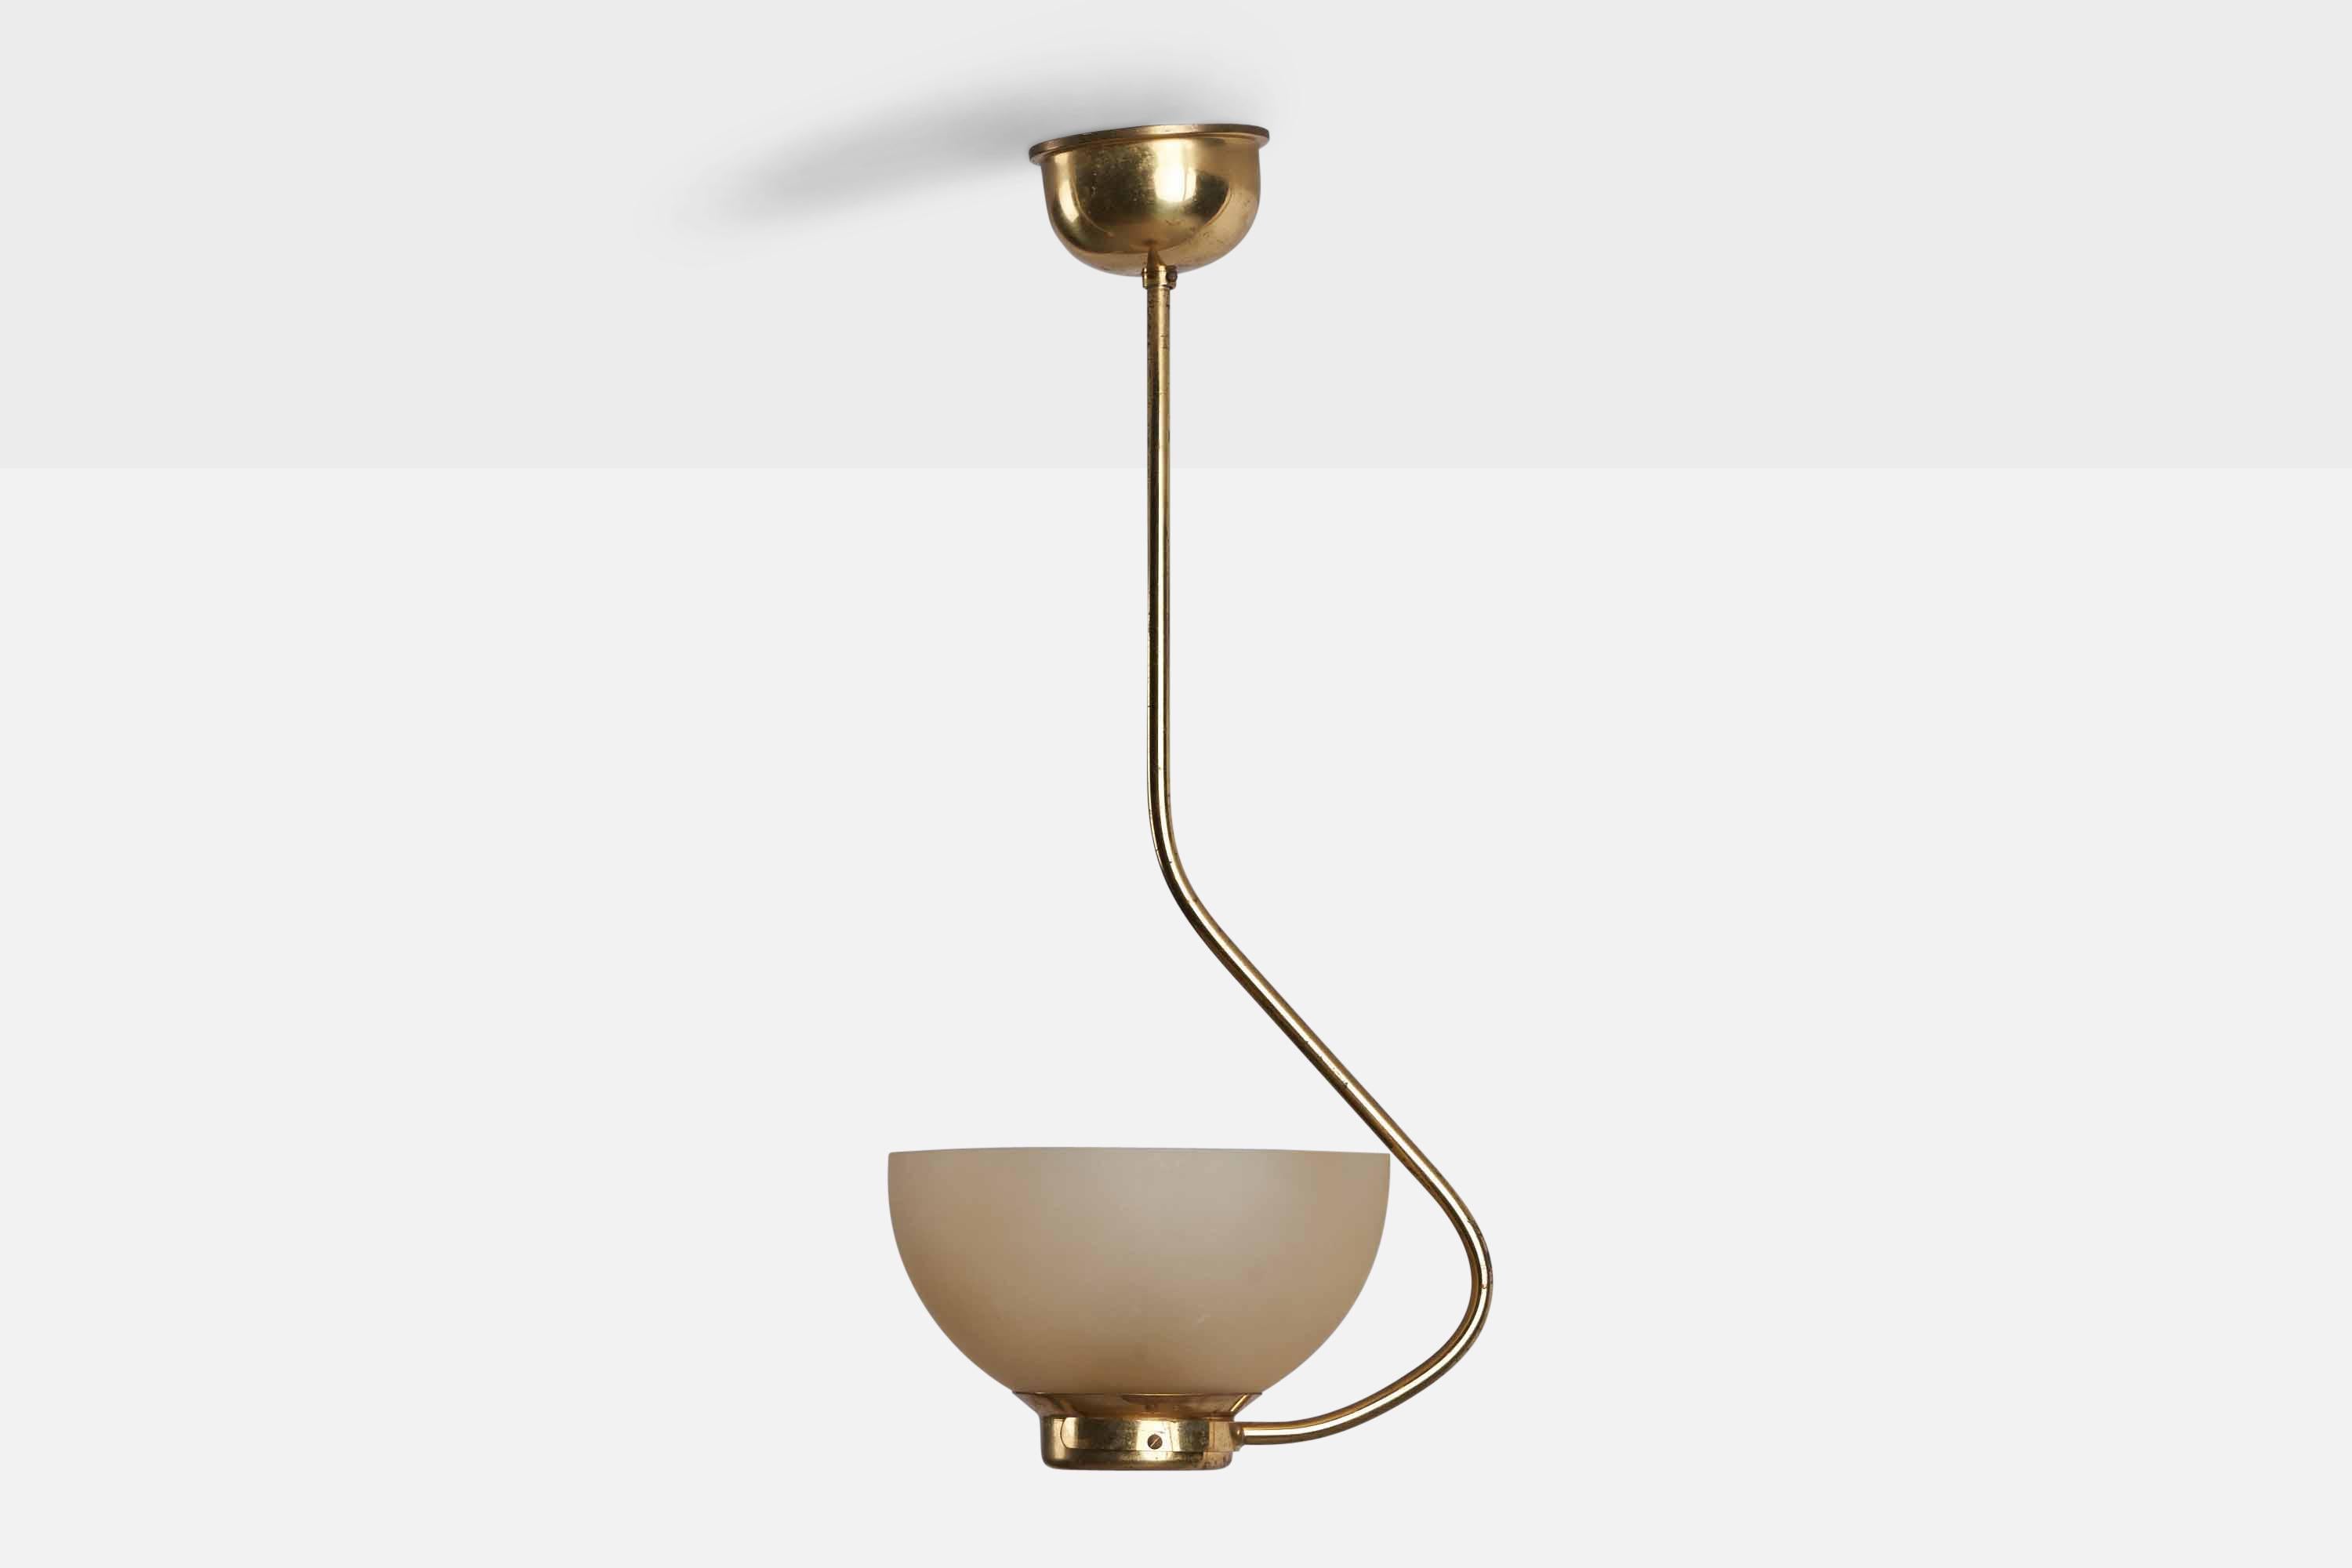 A brass and frosted glass pendant designed and produced in Sweden, 1940s.

Overall Dimensions (inches): 20.5” H x 7.75” W x 9.5” D
Bulb Specifications: E-26 Bulb
Number of Sockets: 1